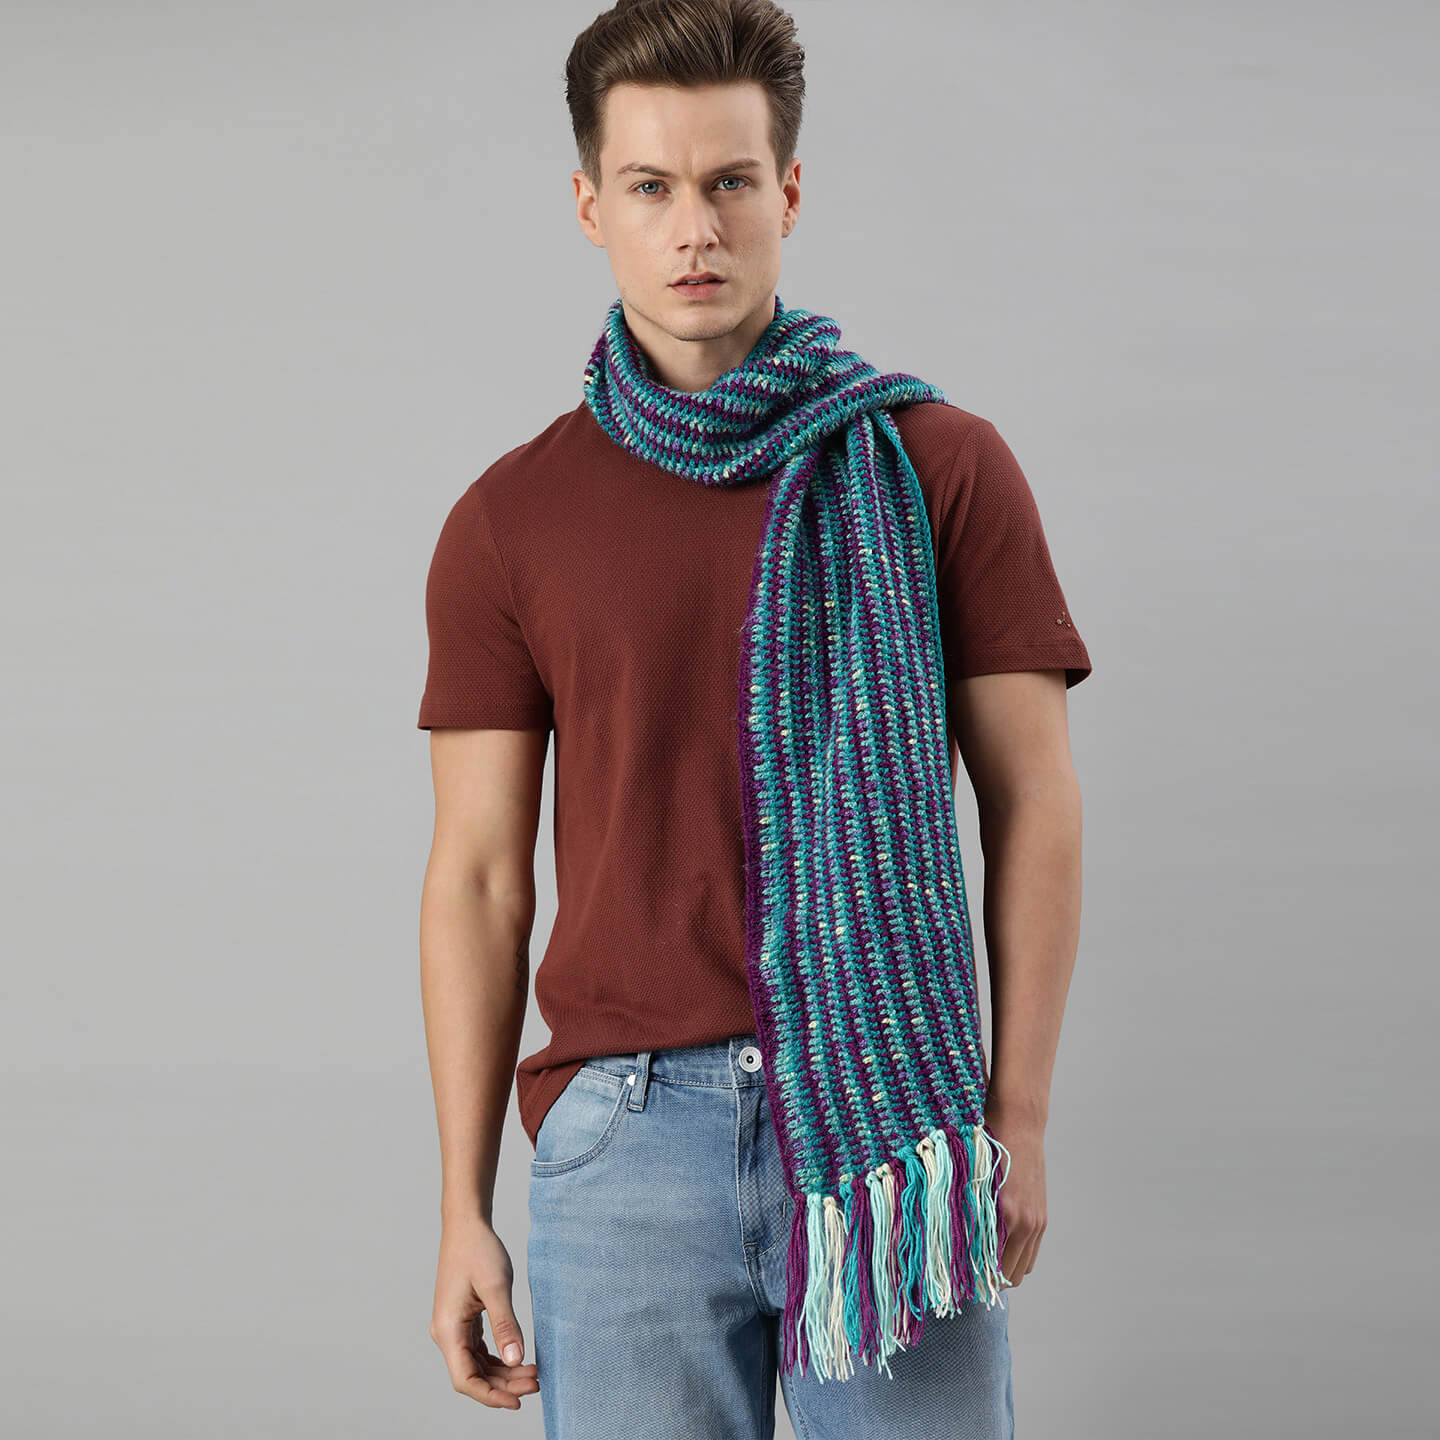 Scarf with Tassels - Multi-Color 2563